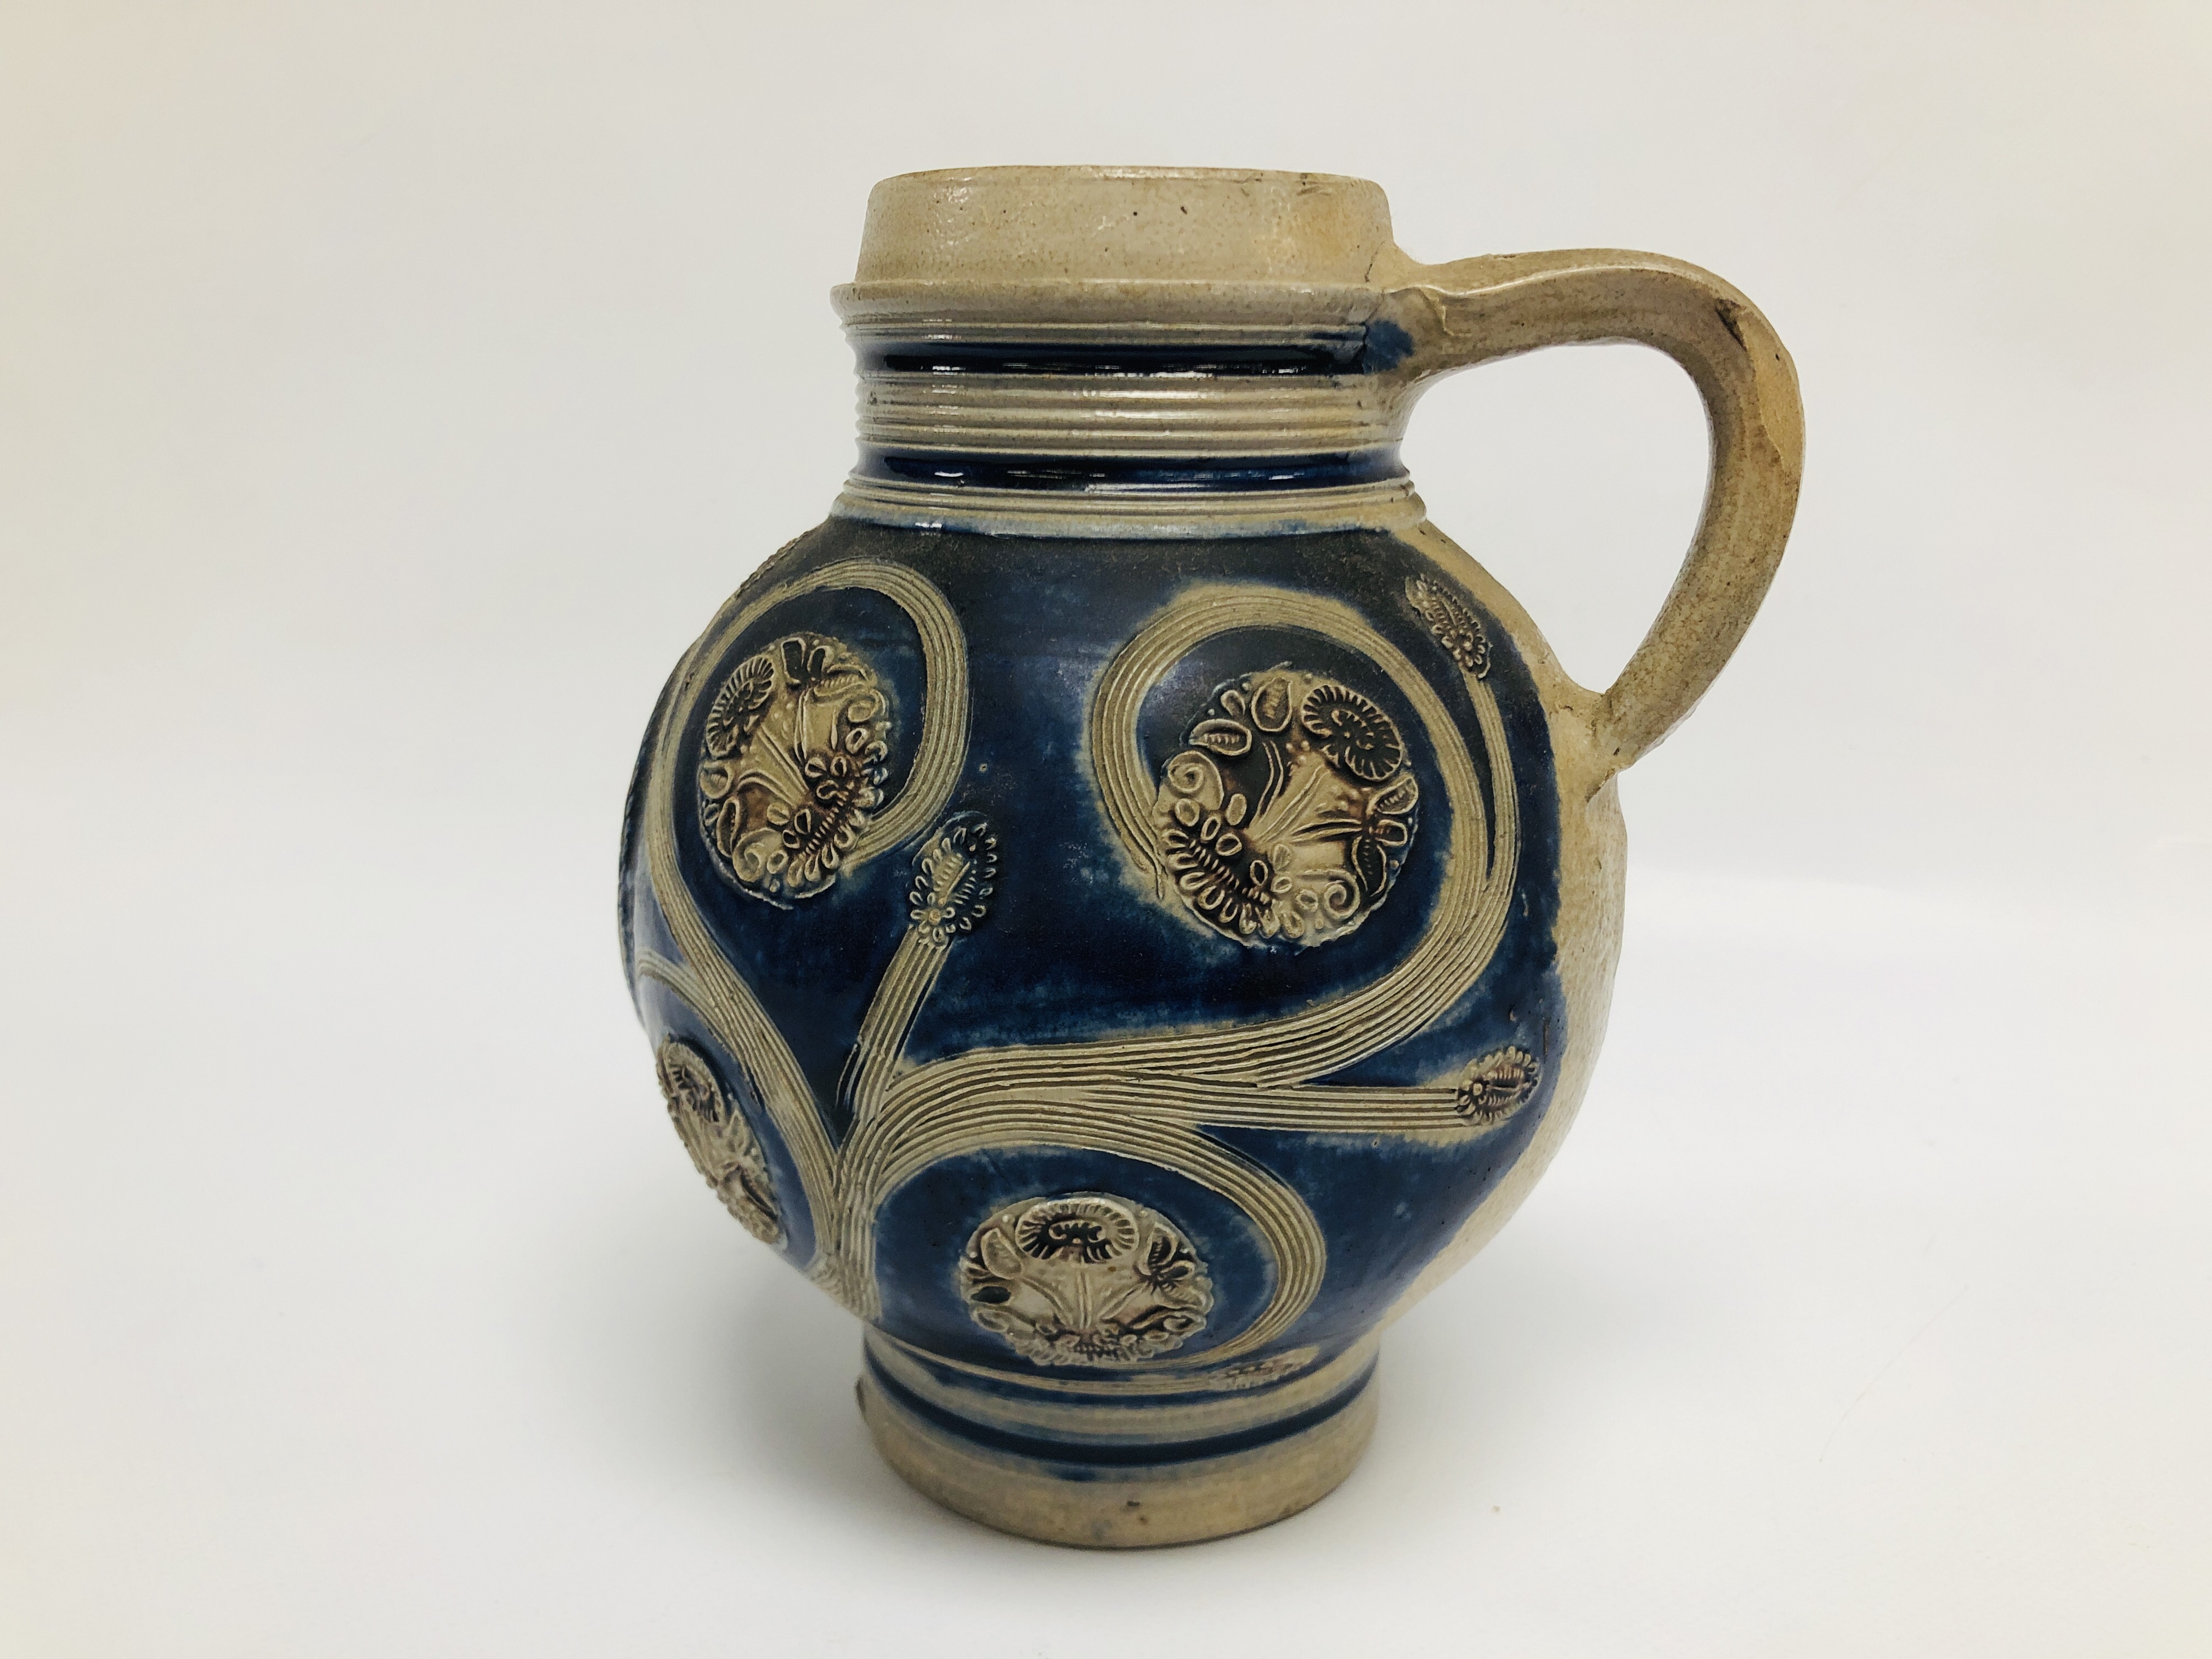 A WESTERWALD STONEWARE JUG WITH MEDALLION PORTRAIT OF WILLIAM III c.1700 (CHIP TO RIM). - Image 6 of 8